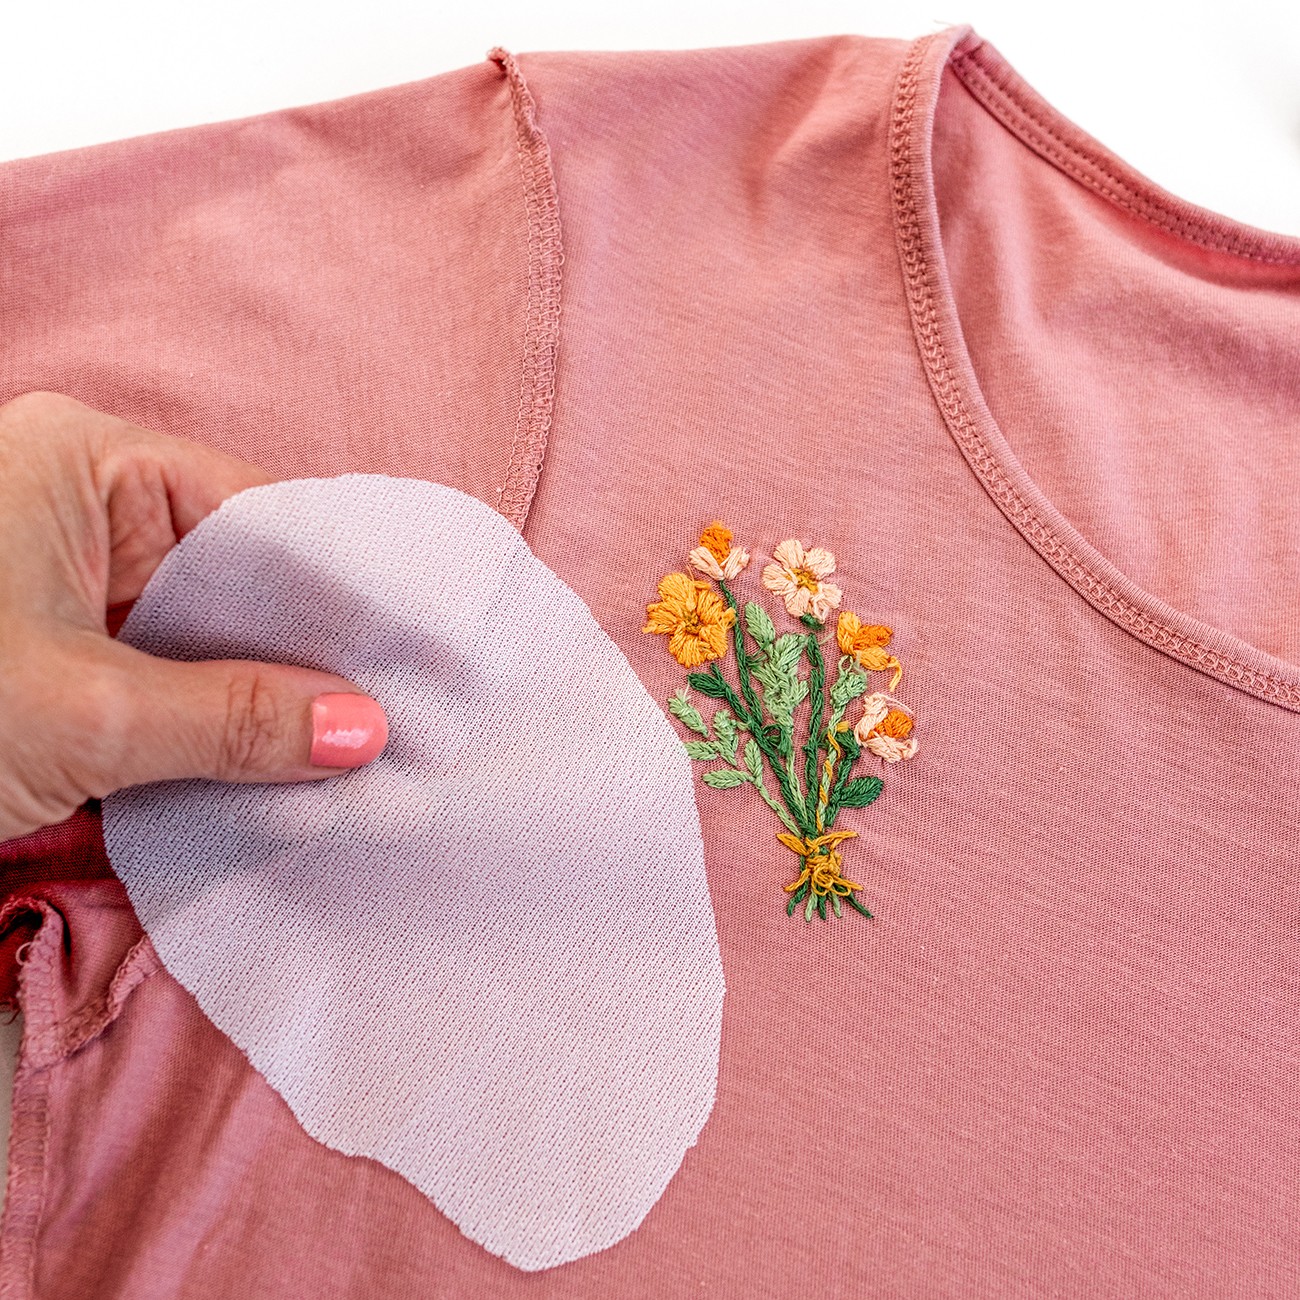 How to Customise Clothes with Hand Embroidery